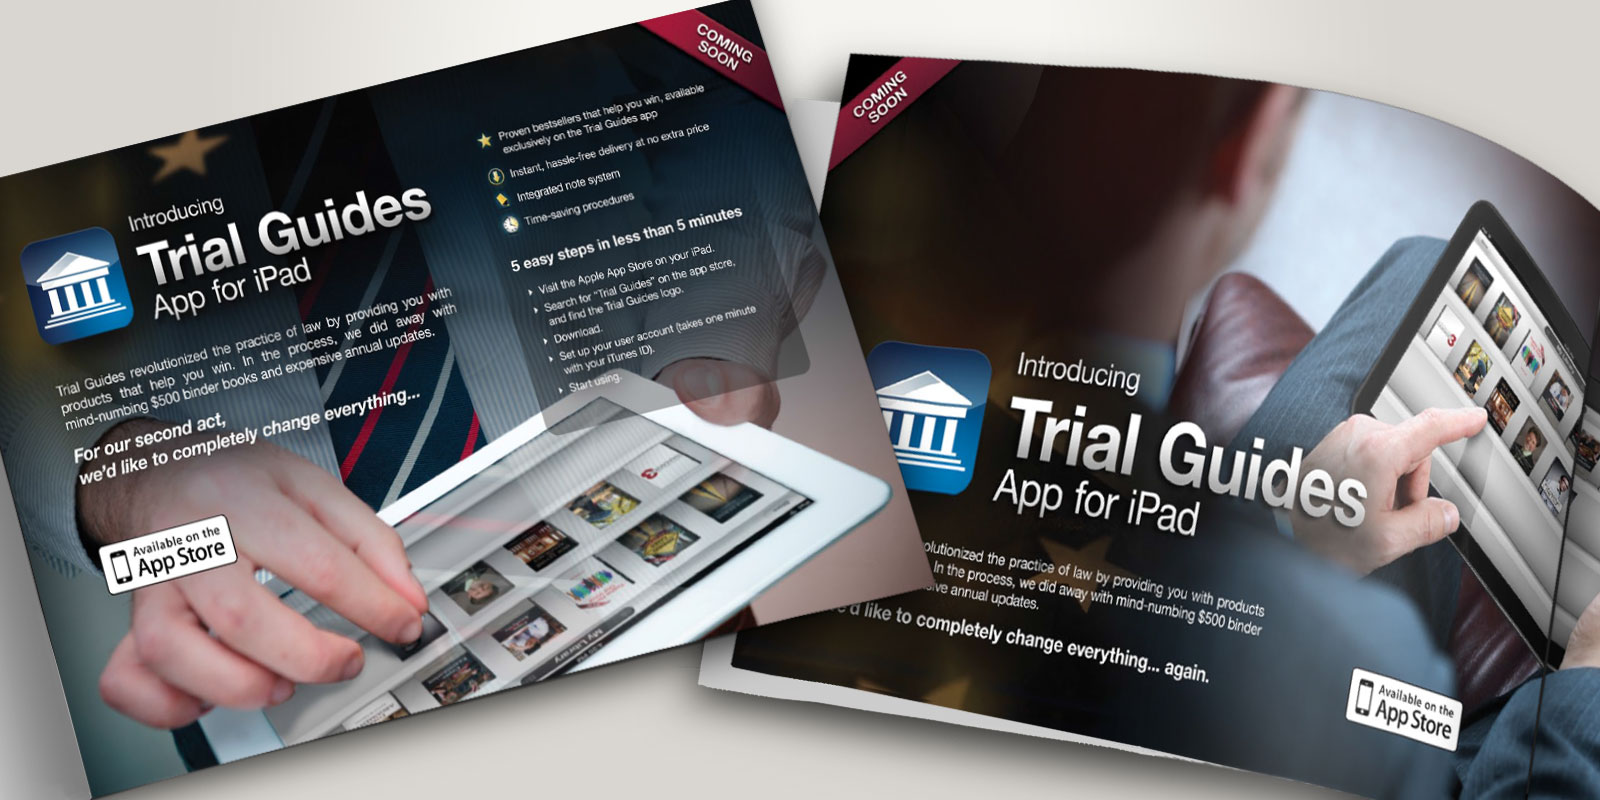 Trial Guides advertisements